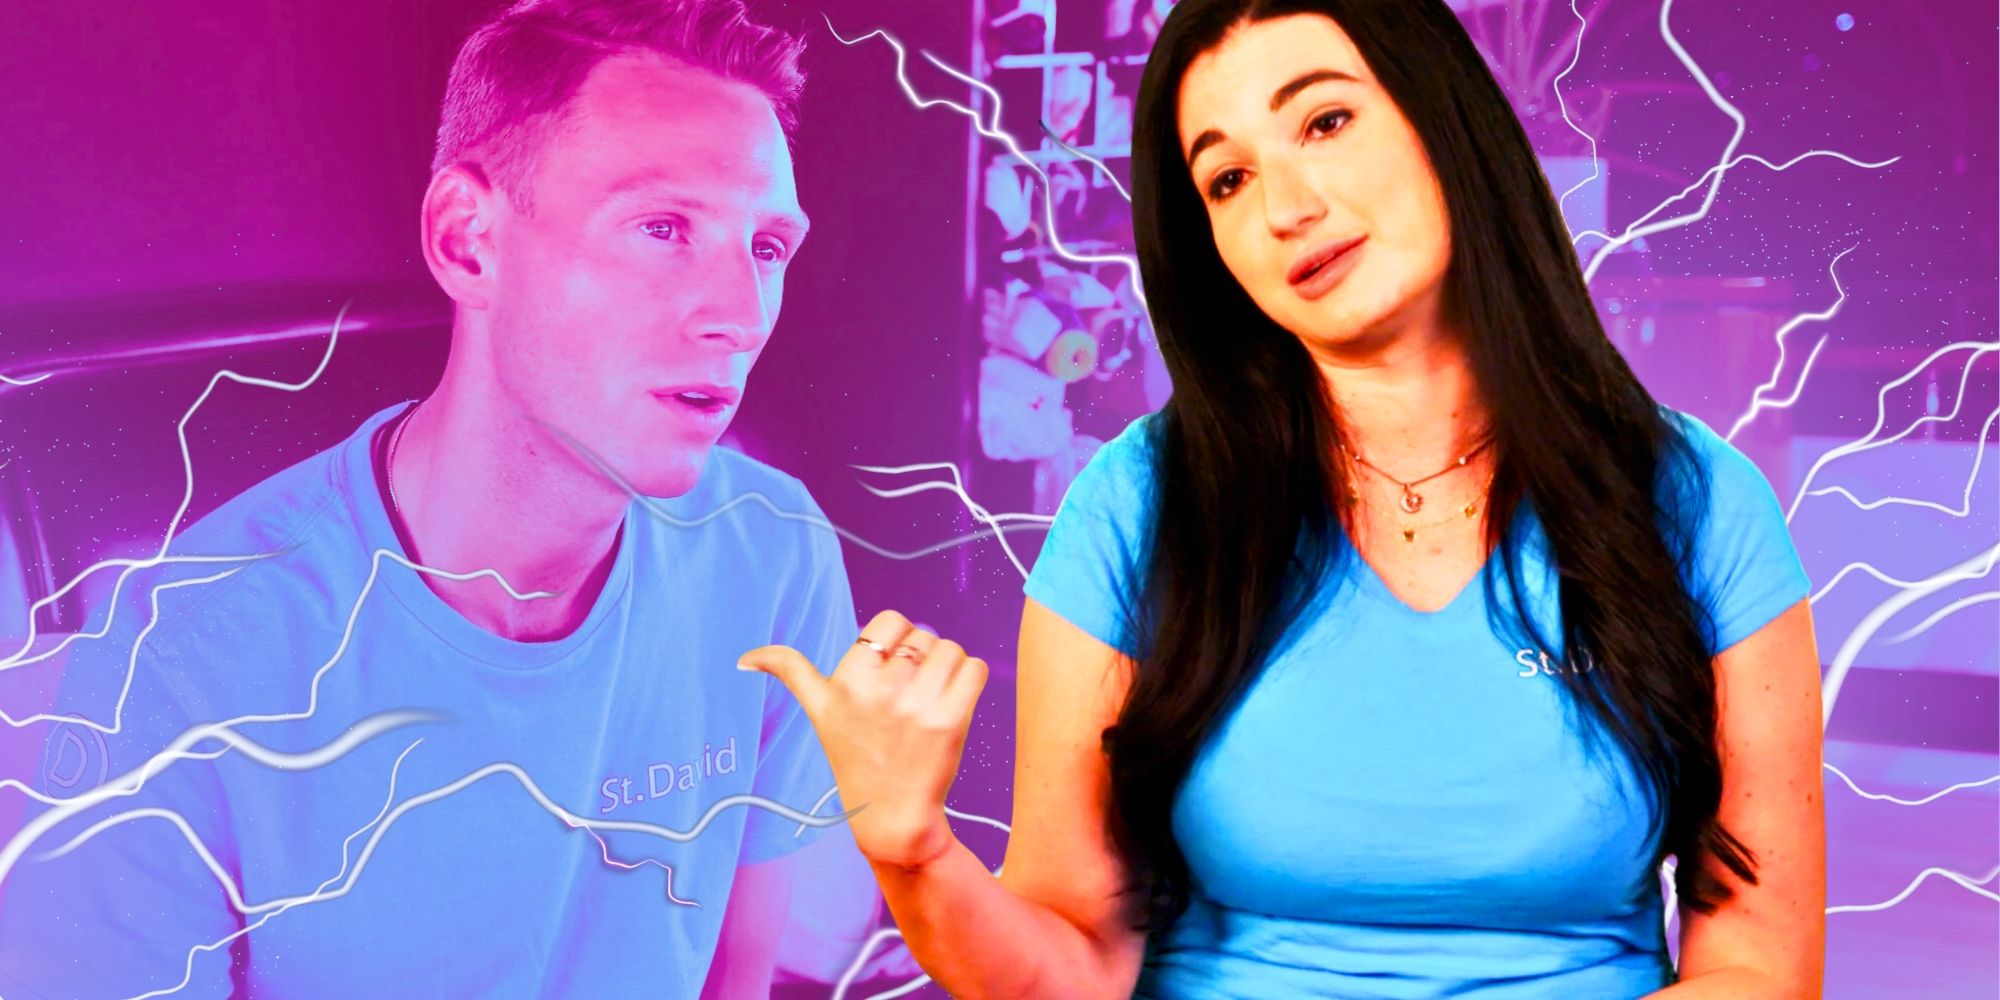 Fraser & Xandi from below deck in their blues surrounded by lightning and purple filtered background